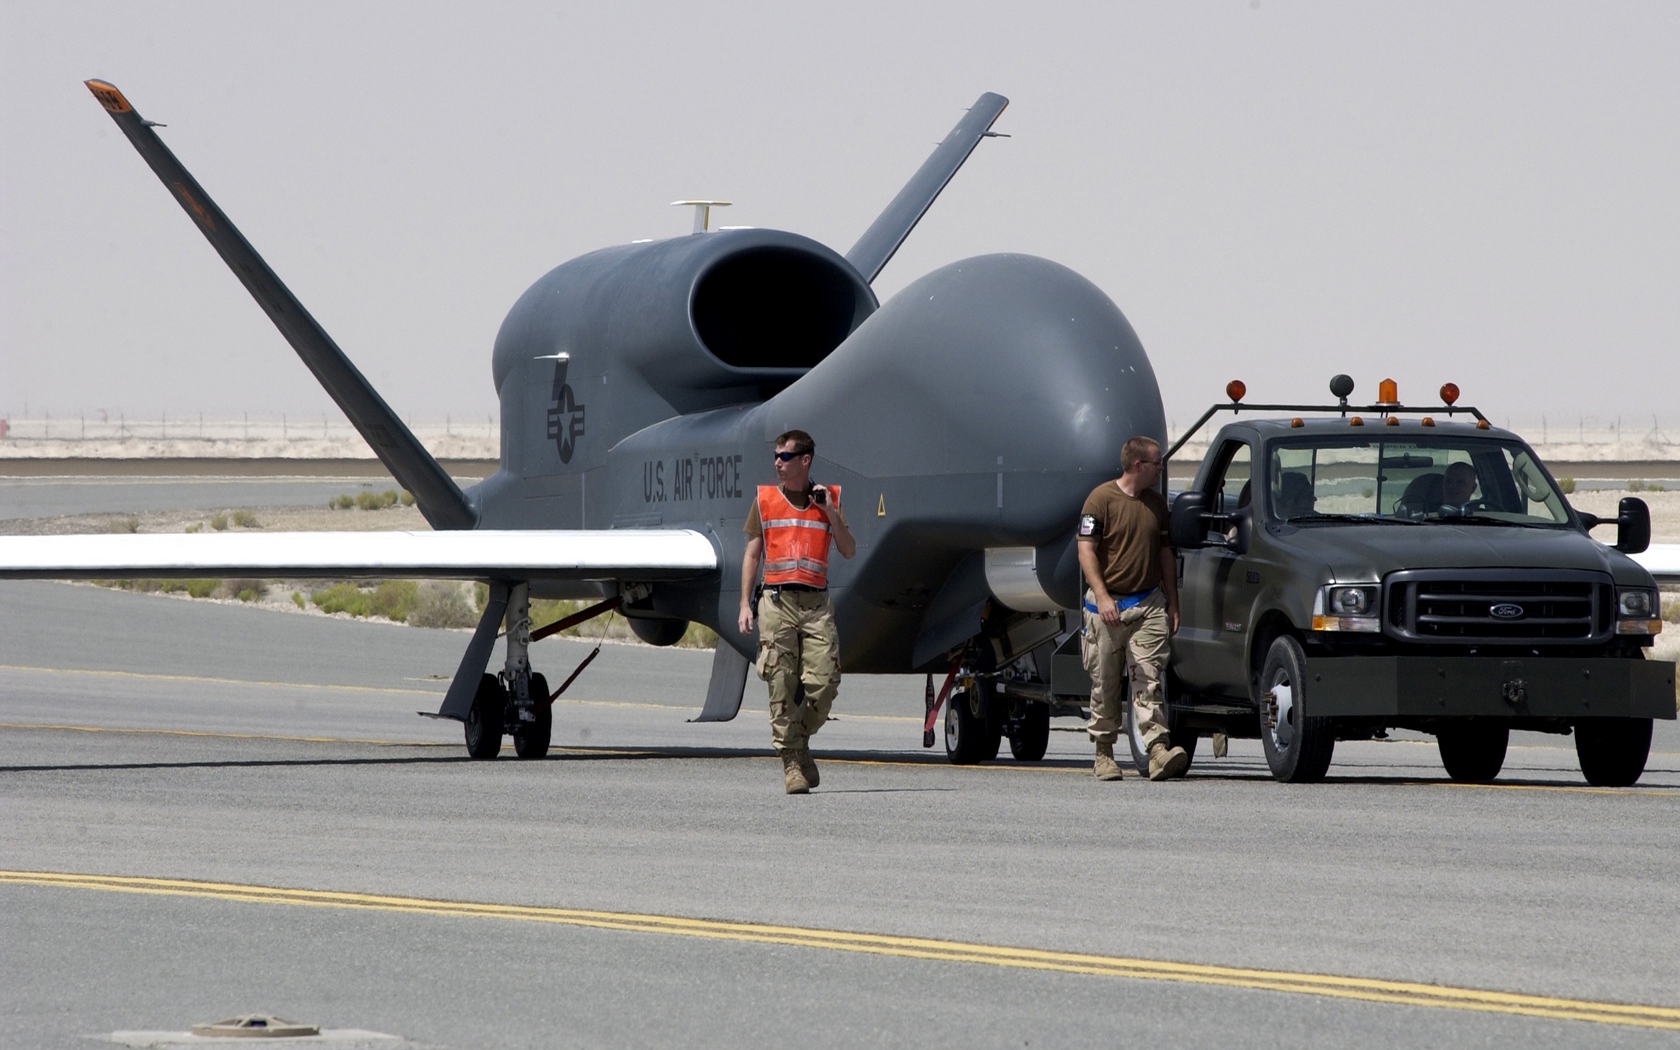 Download HQ Globalhawk Unmanned Aicraft Military Airplanes wallpaper / 1680x1050